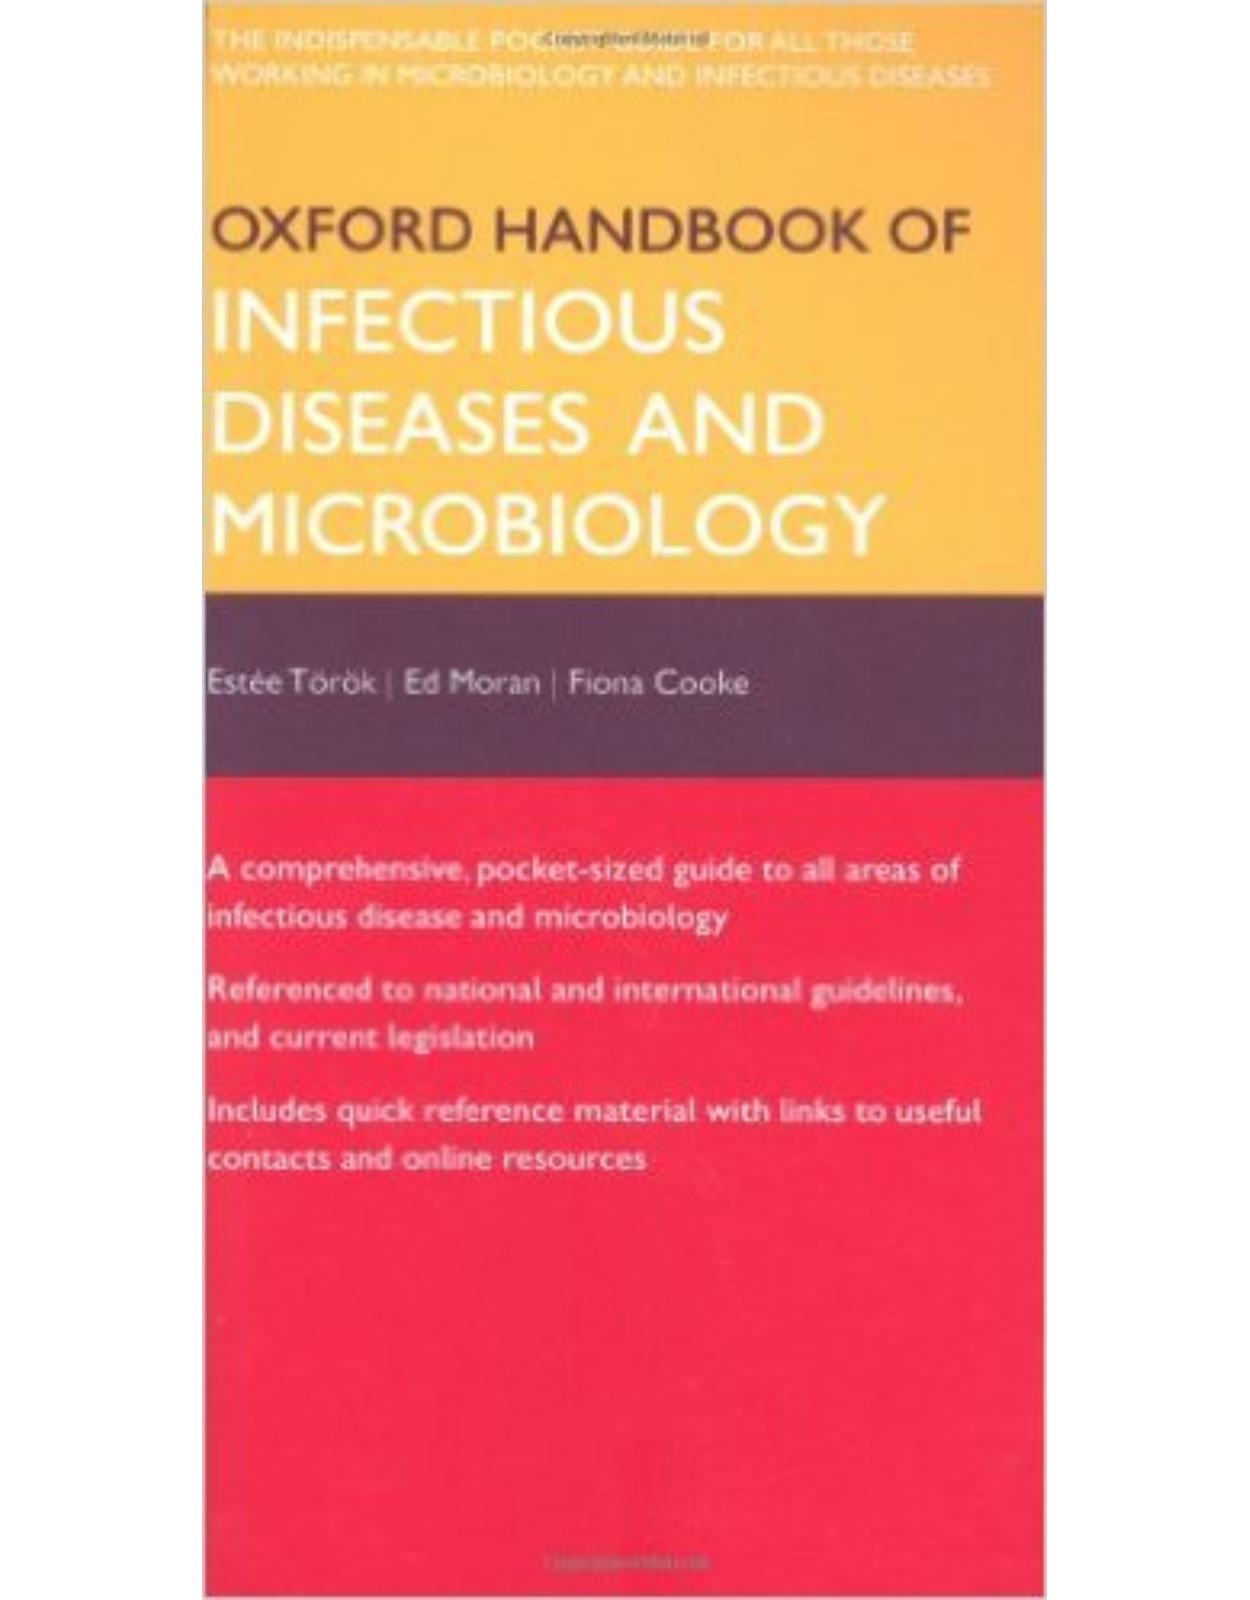 Oxford Handbook of Infectious Diseases and Microbiology 